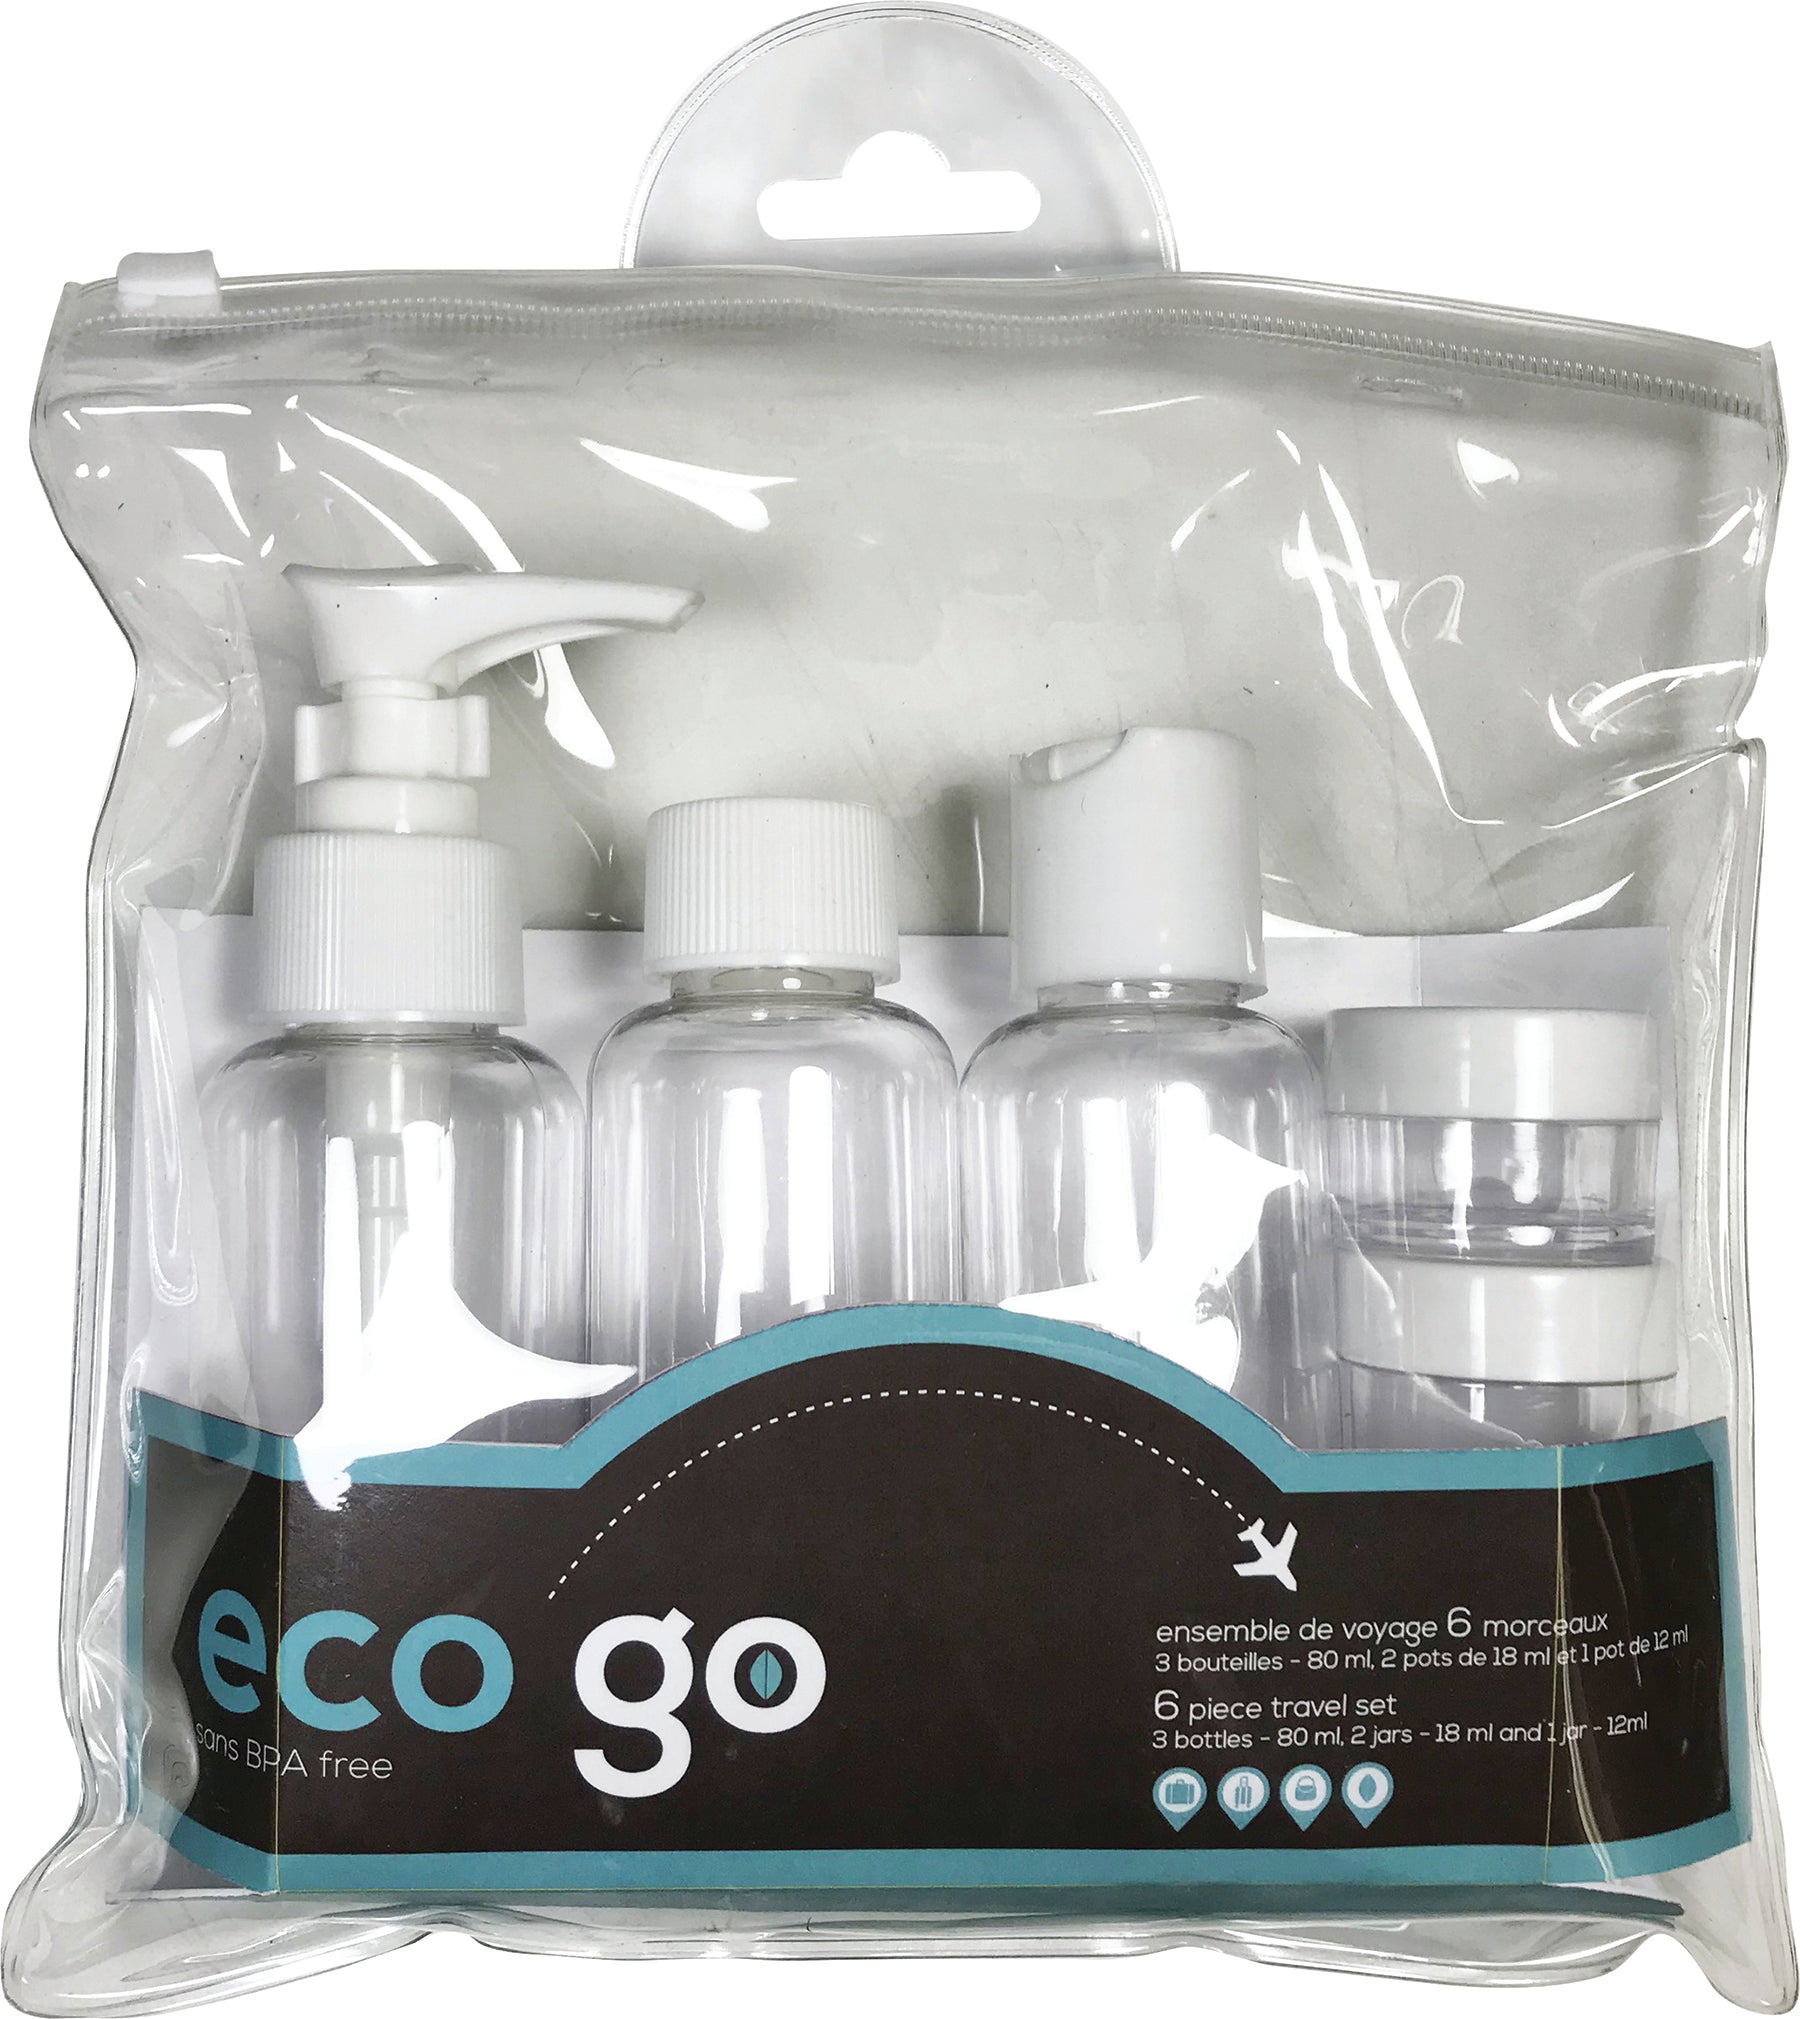 Eco Go Travel 6pcs Bottles and Jars Clear Plastic 3 of each